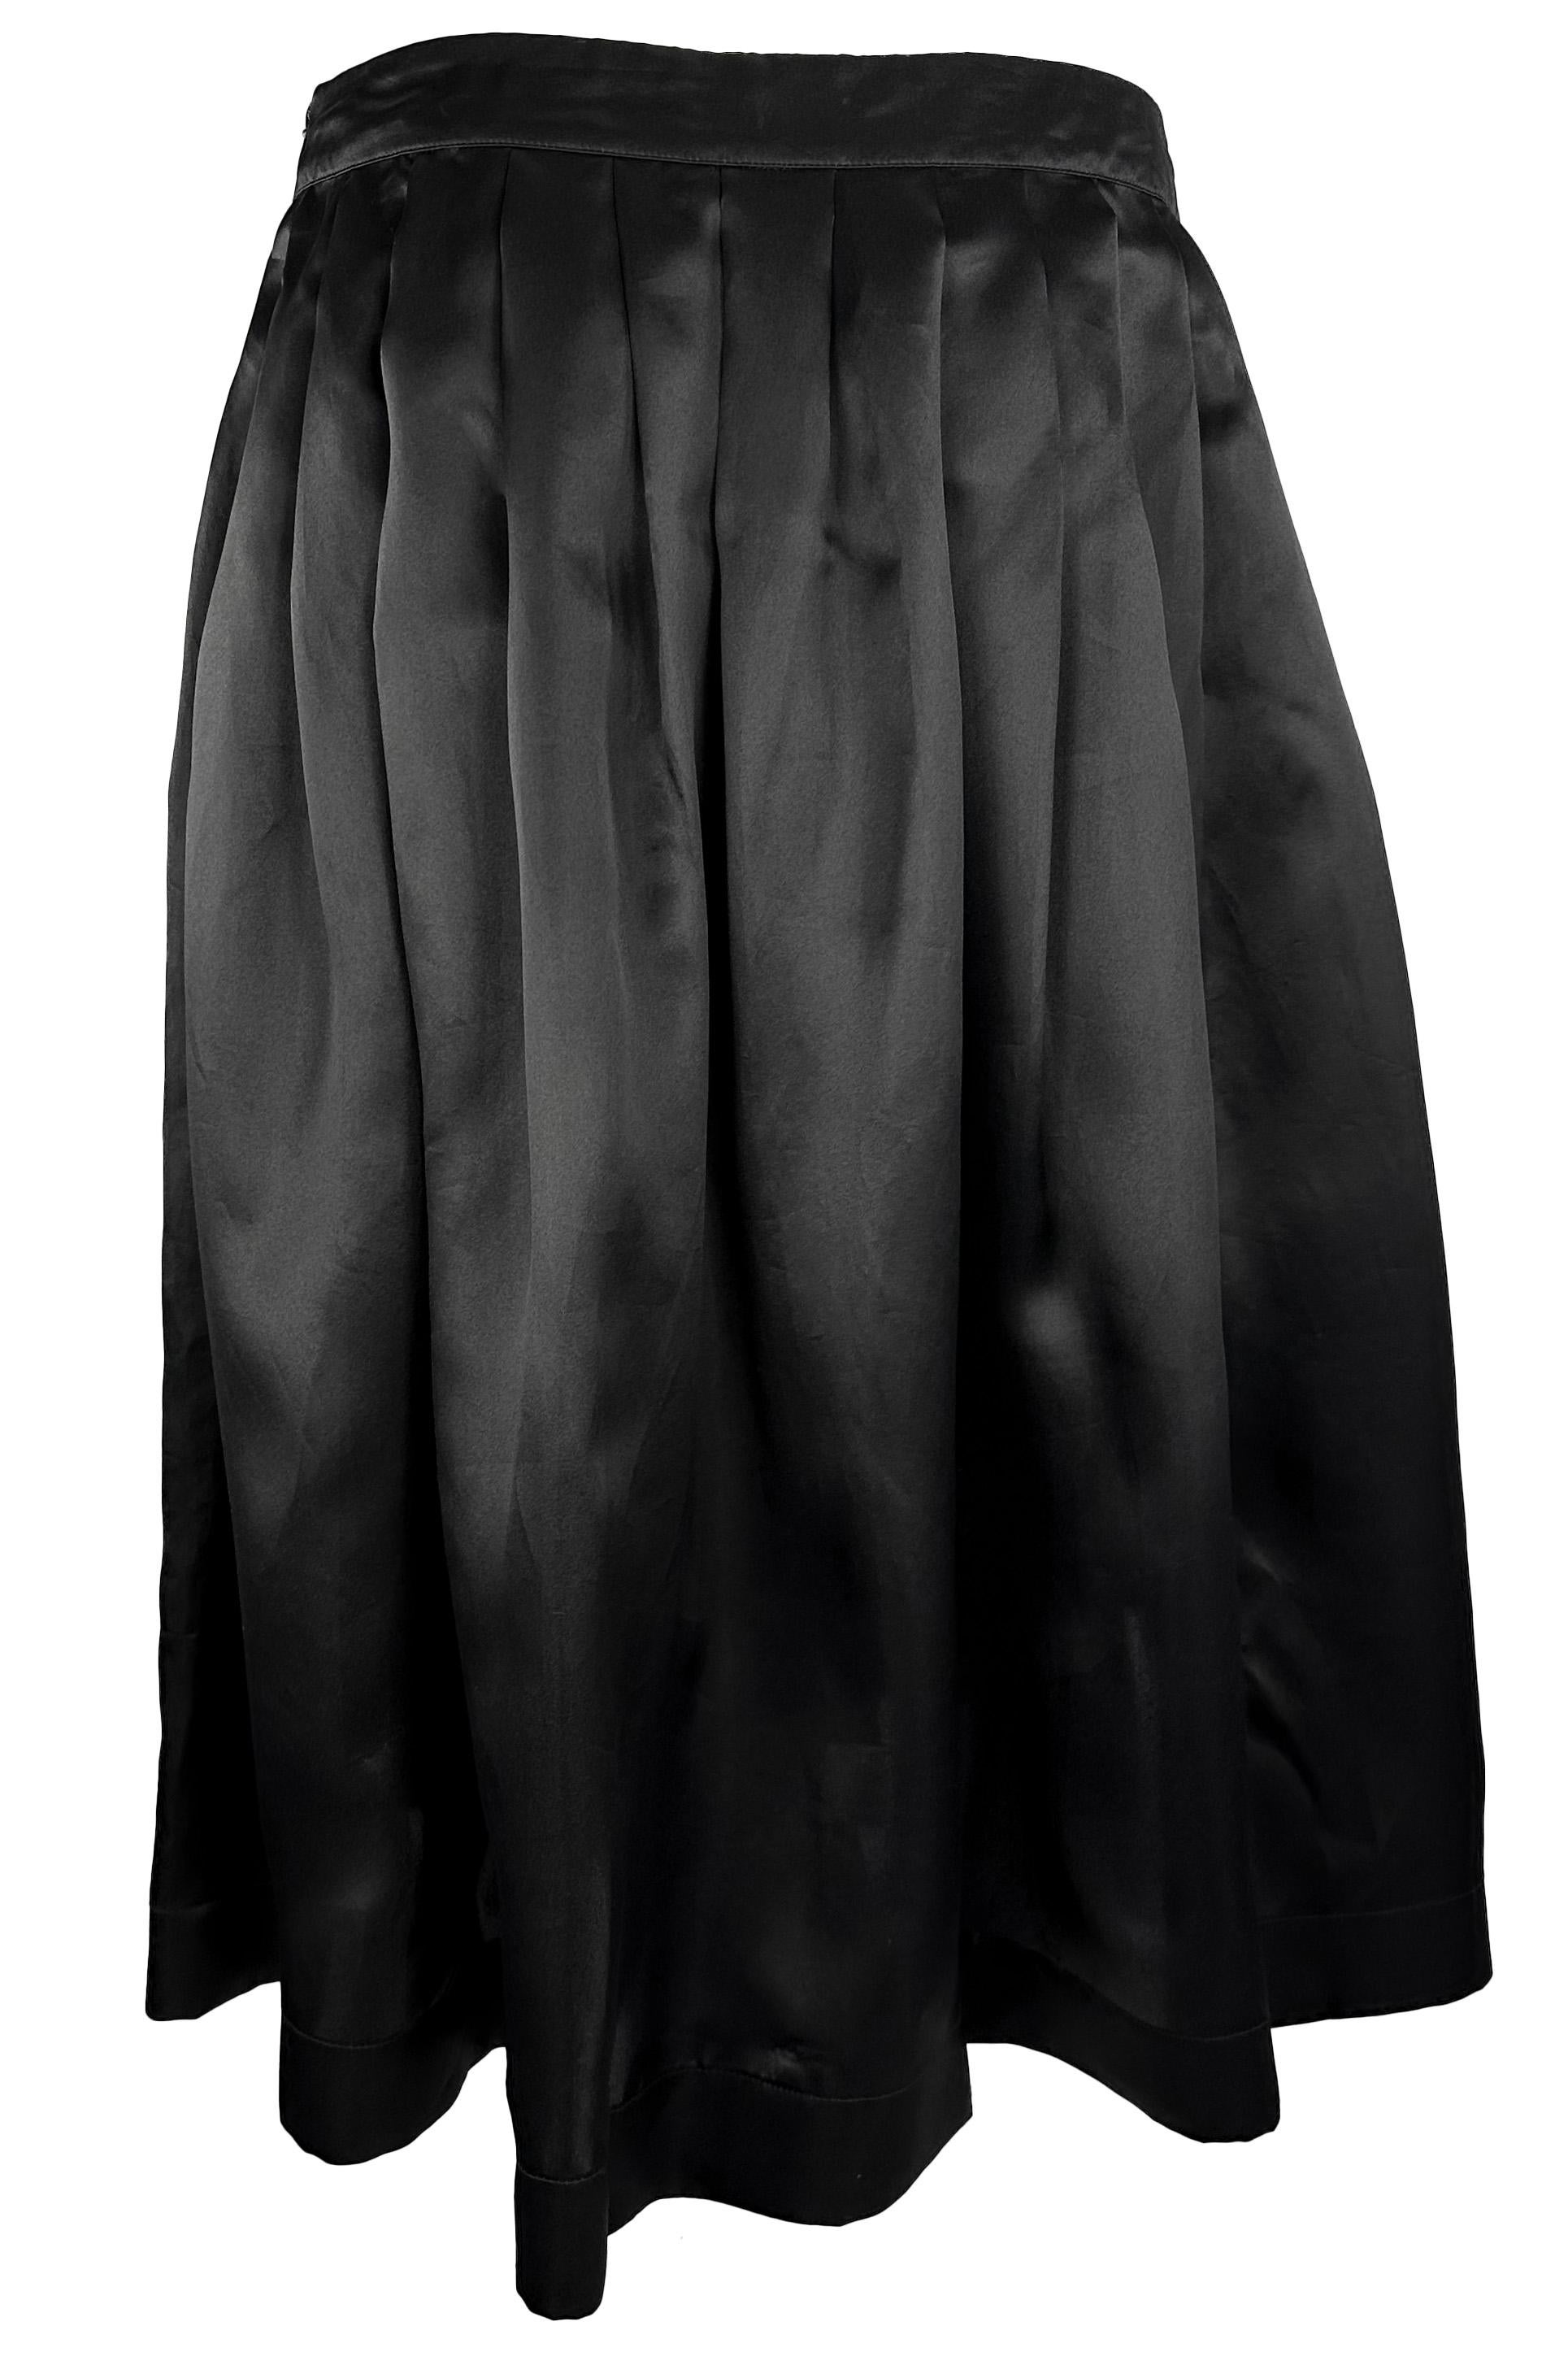 S/S 1995 Gucci by Tom Ford Runway Black Silk Satin Pleated Flare Skirt For Sale 1